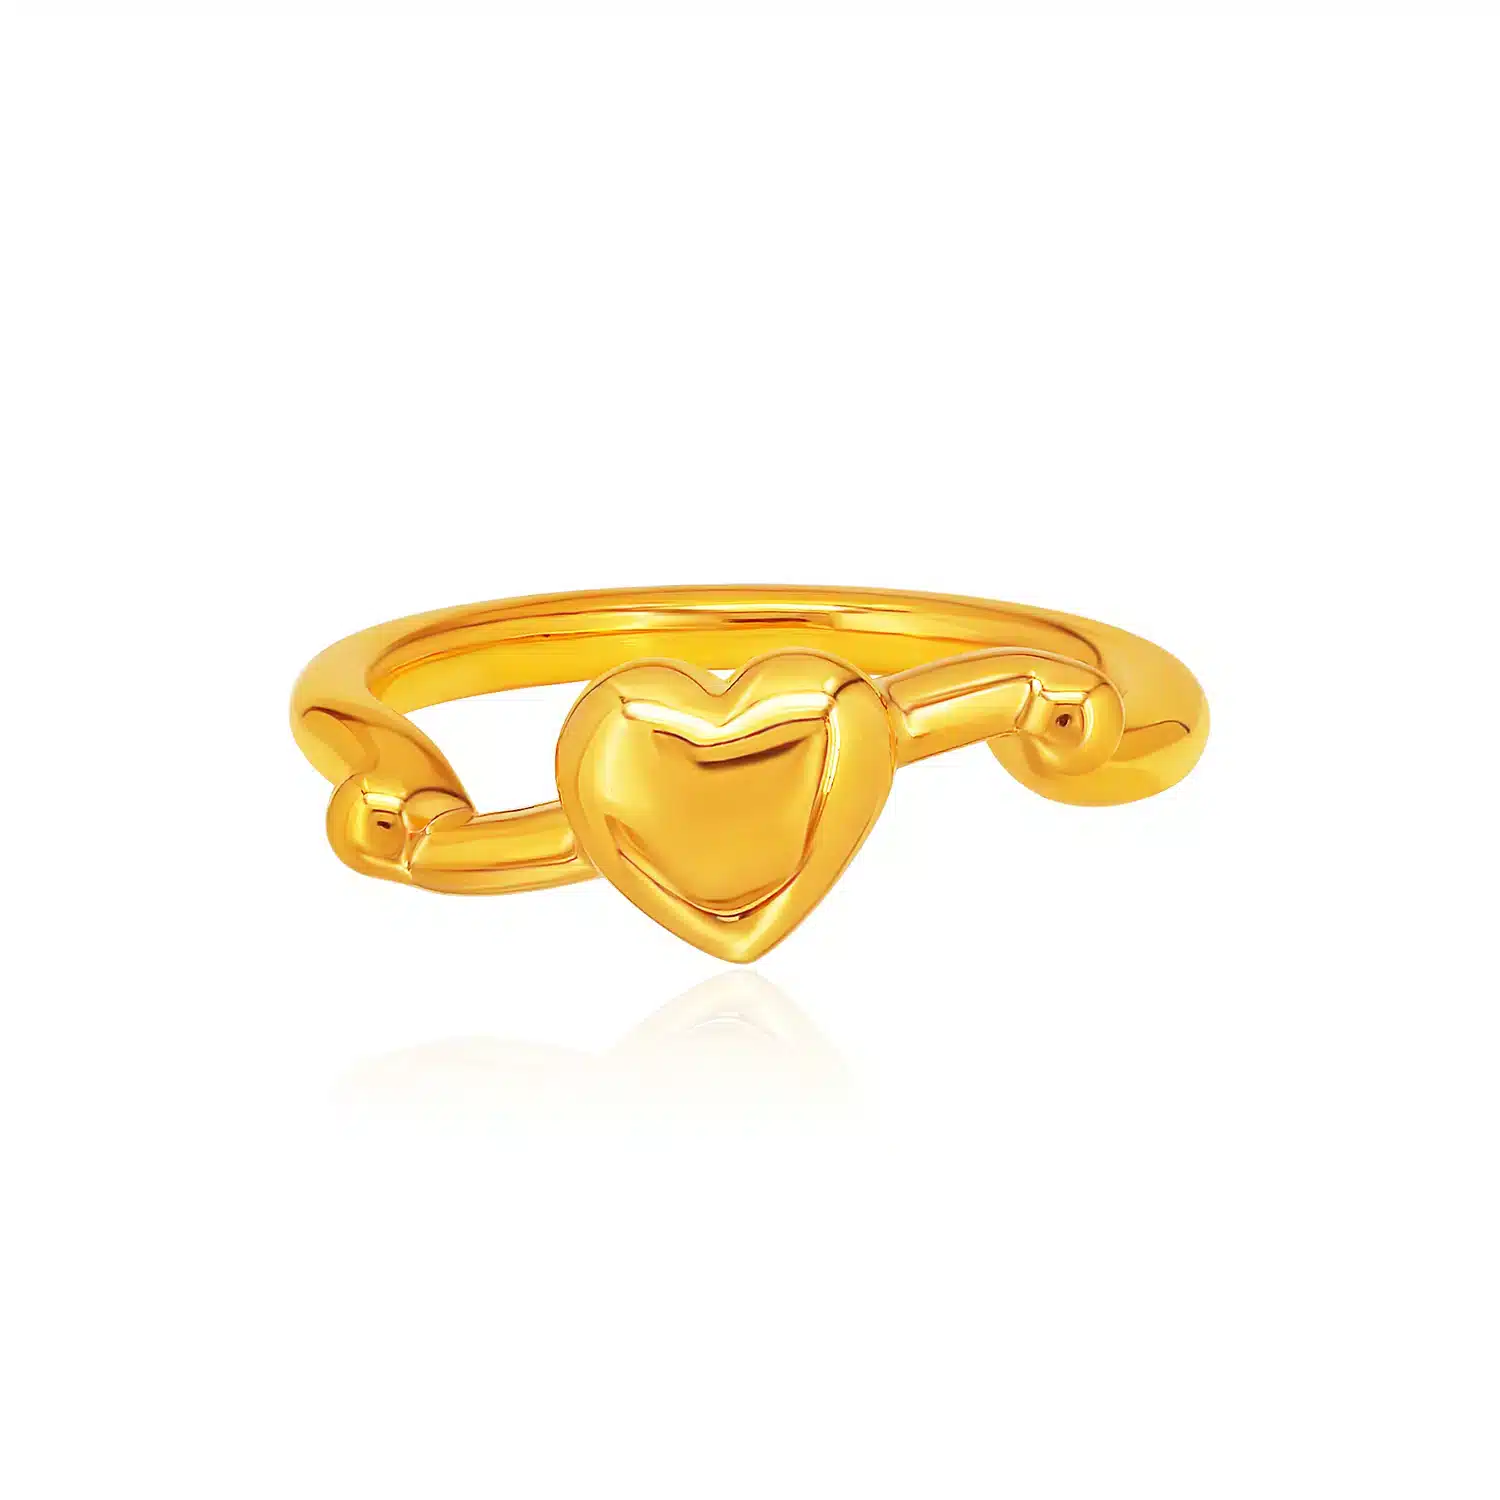 Marigold Dance Lover 999 Pure Gold Ring | SK Jewellery